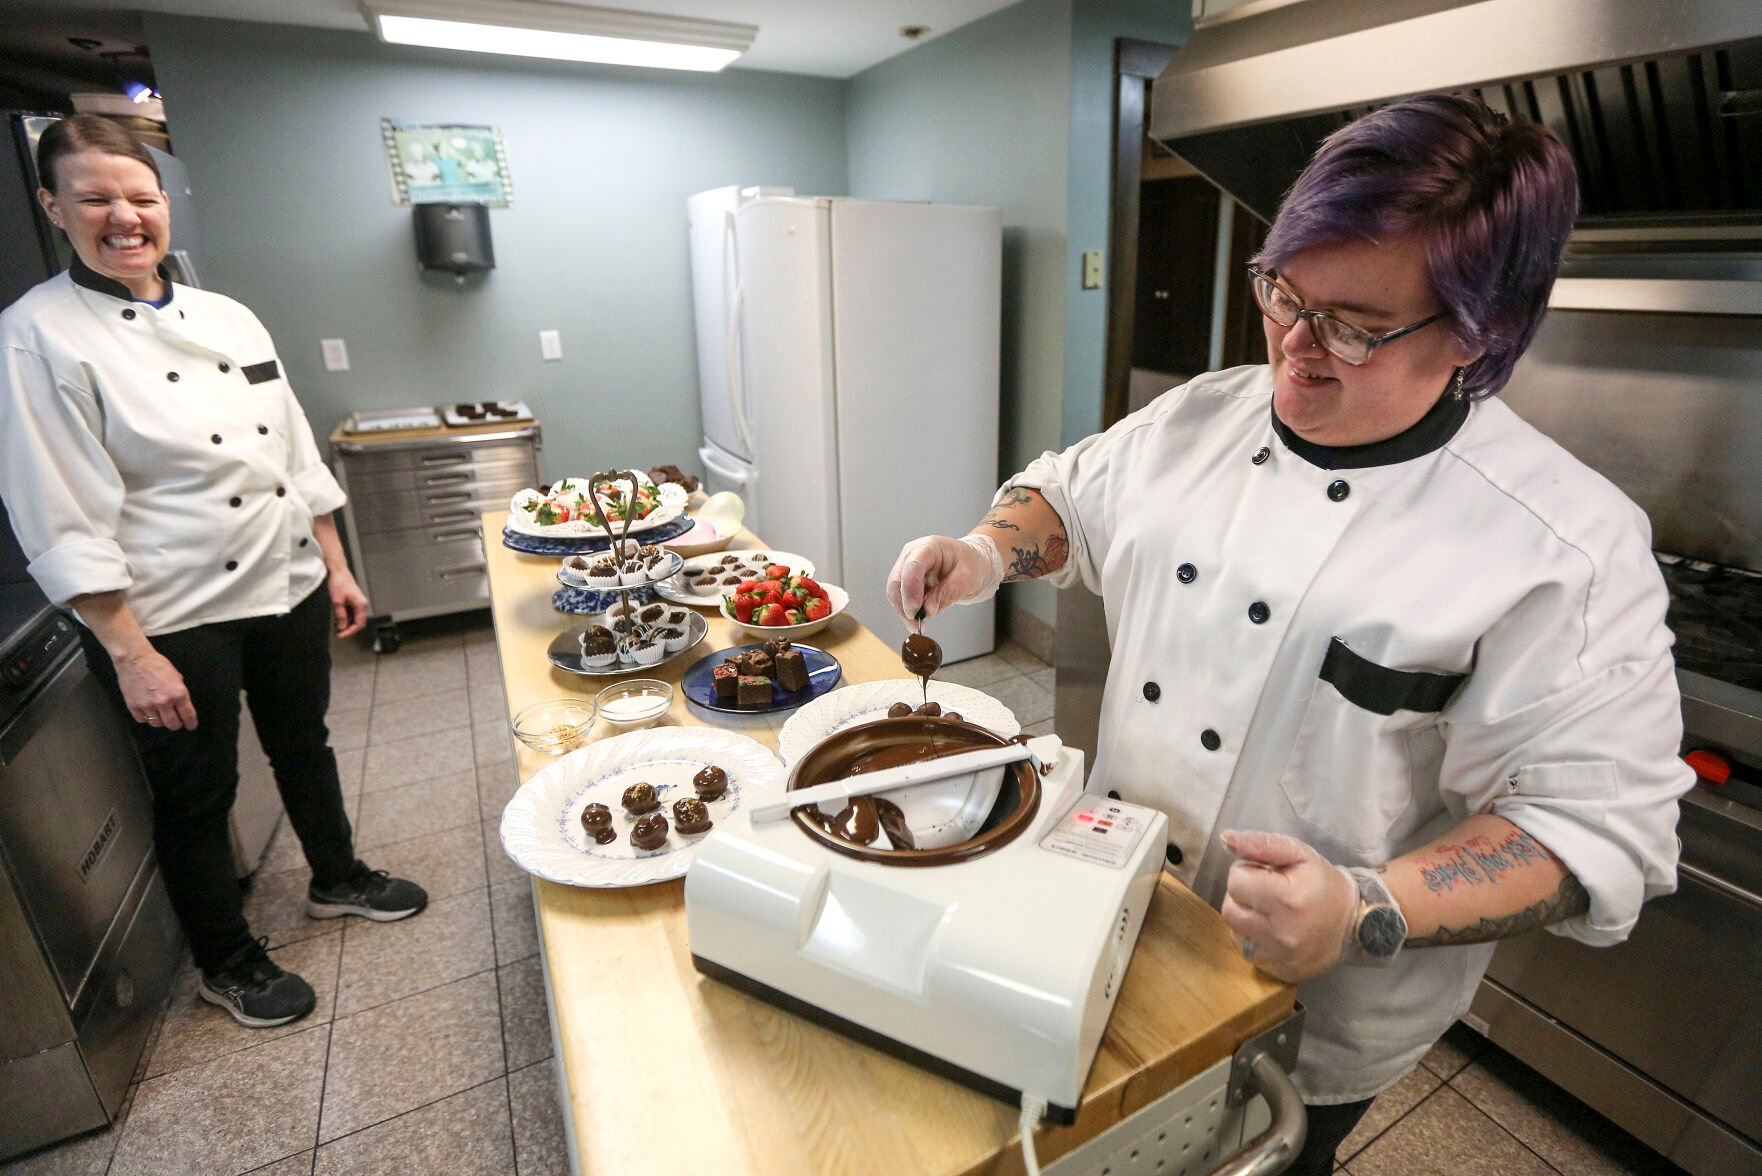 Charity Starbuck (right), baker and manager at Field of Chocolate Dreams, makes truffles along with assistant Naomi Kueter at Mont Rest Inn in Bellevue, Iowa.    PHOTO CREDIT: Dave Kettering